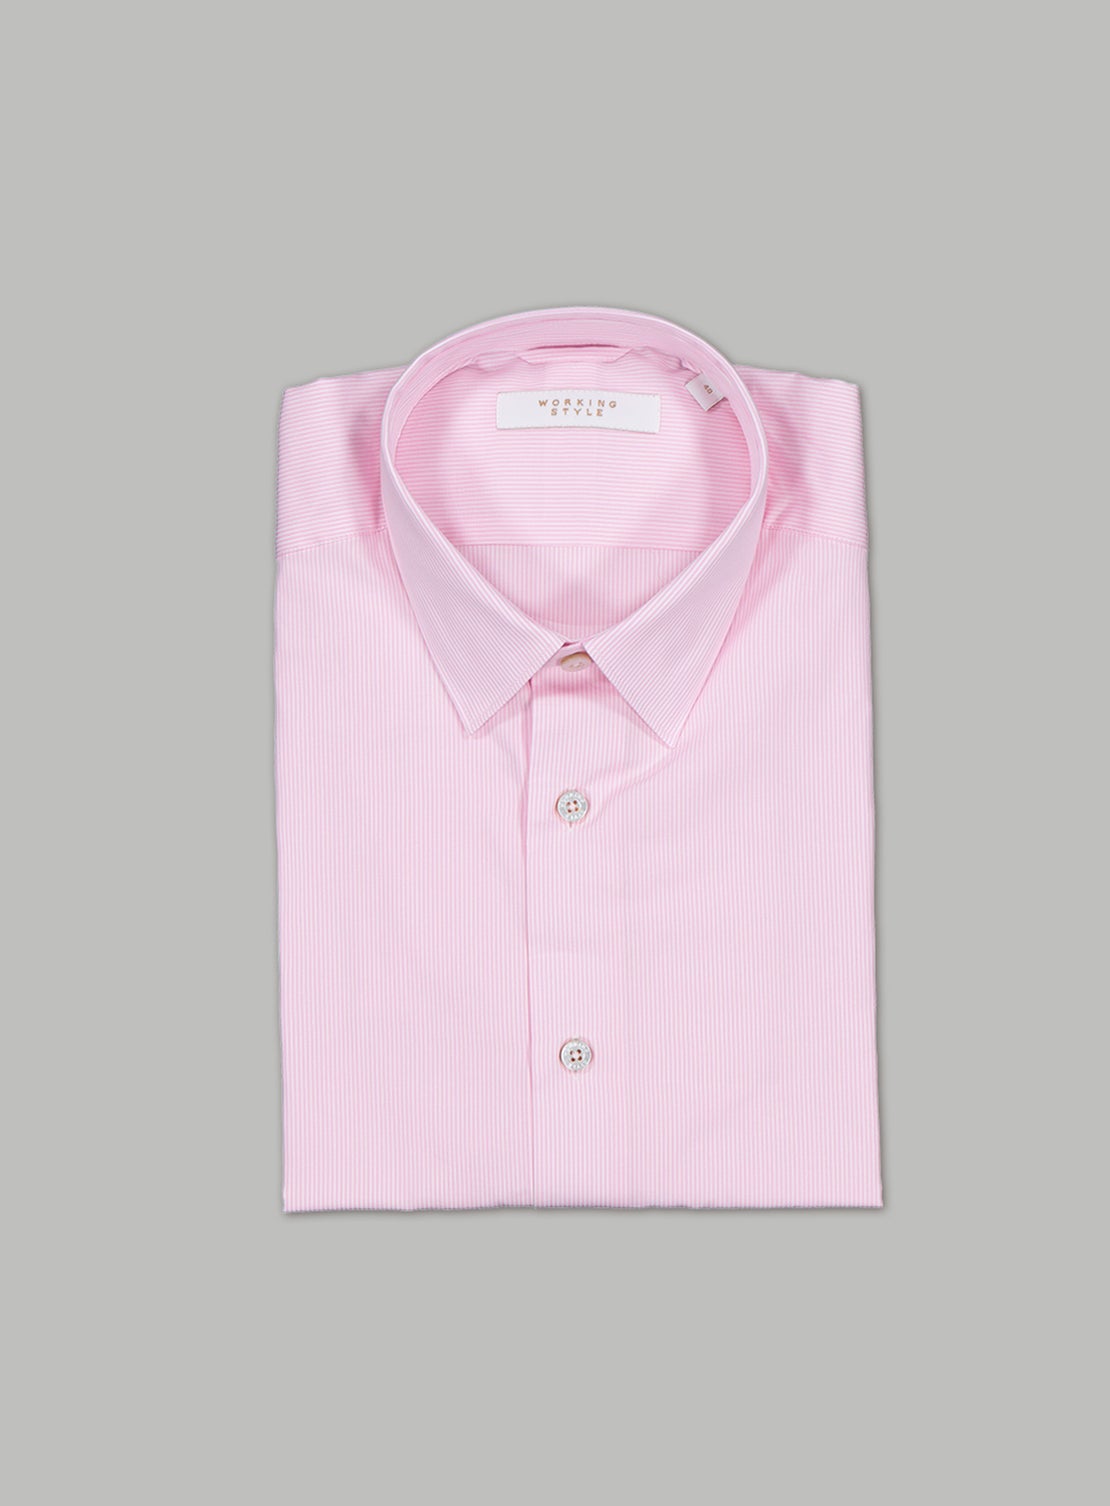 Pink Stripe Shirt - Product - Working Style